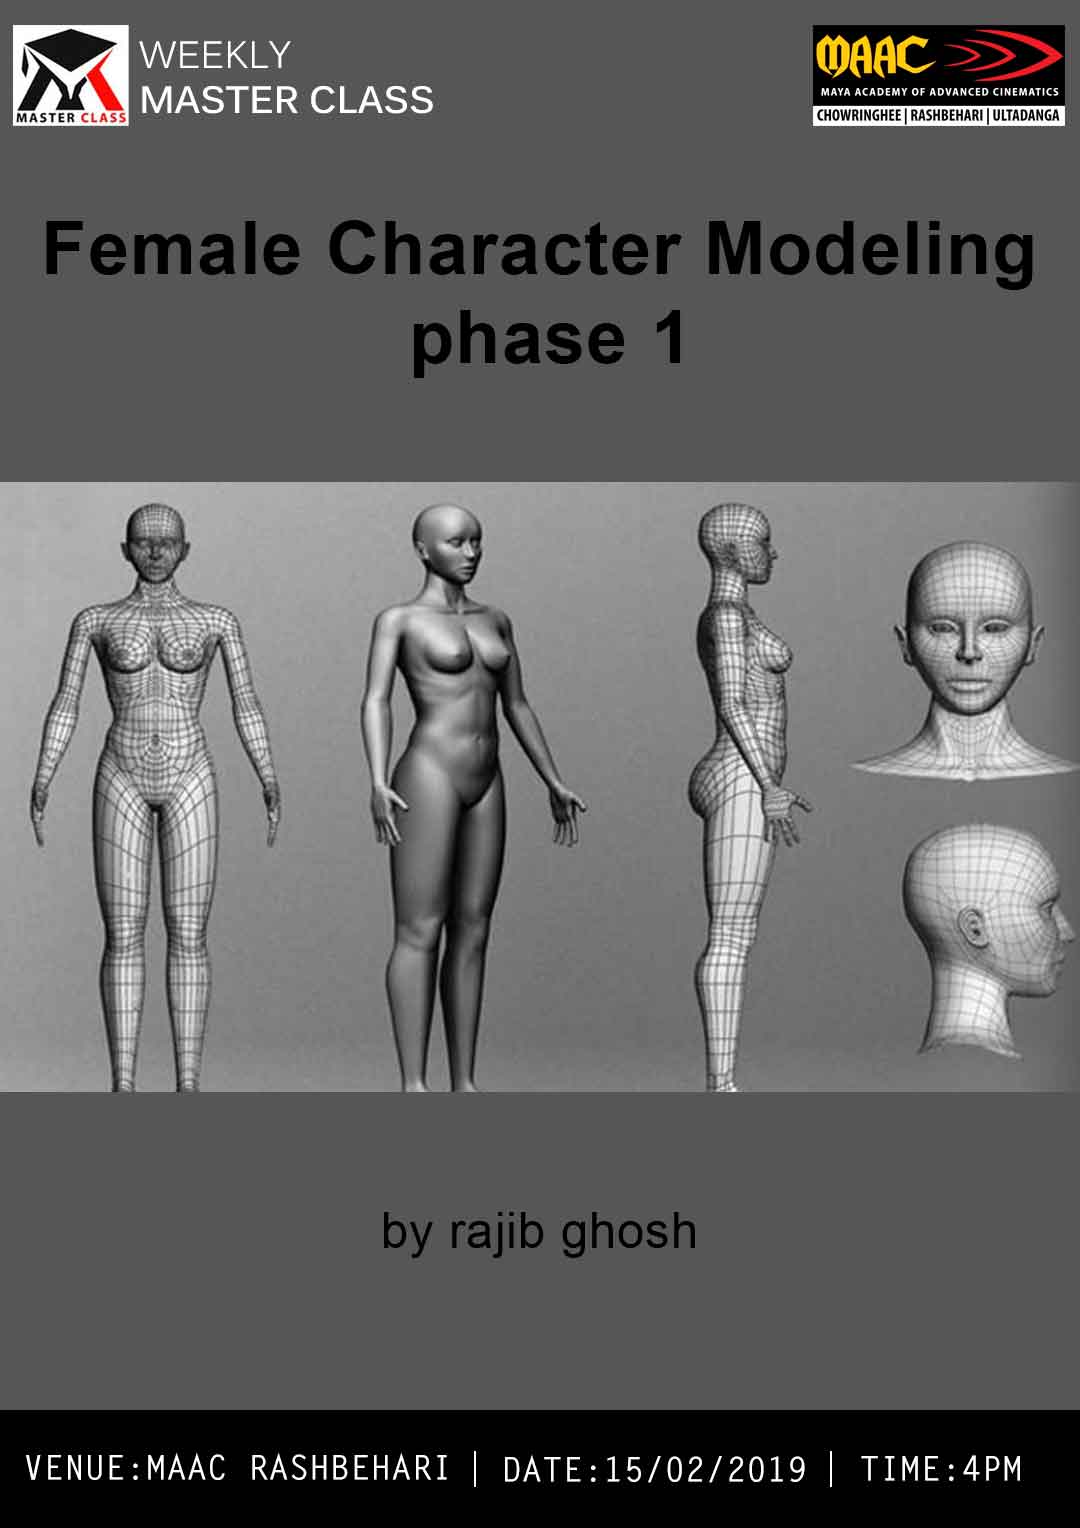 Weekly Master Class on Female Character Modeling Phase 1